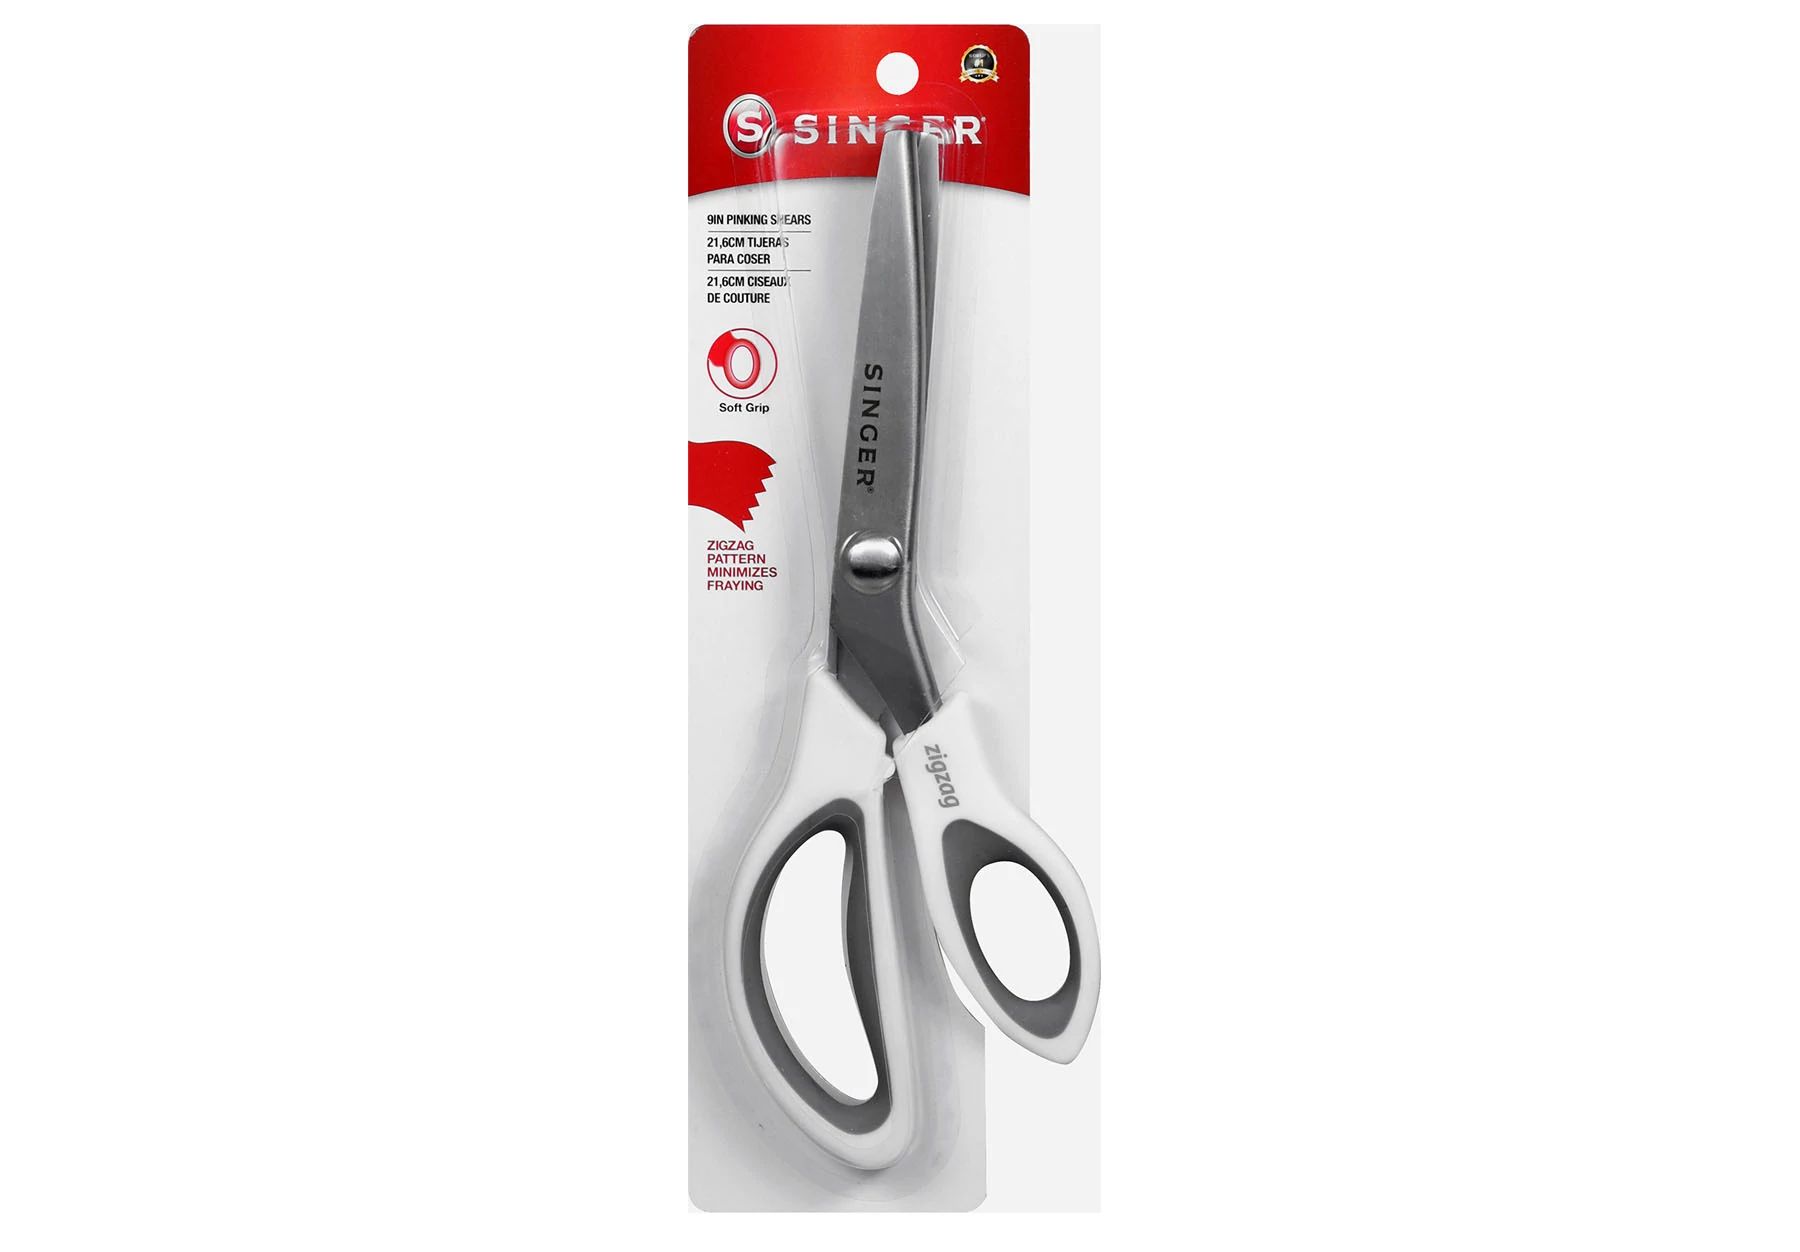 SINGER 9" Pinking Shears with Comfort Grip, Stainless Steel Zig Zag Scissors 